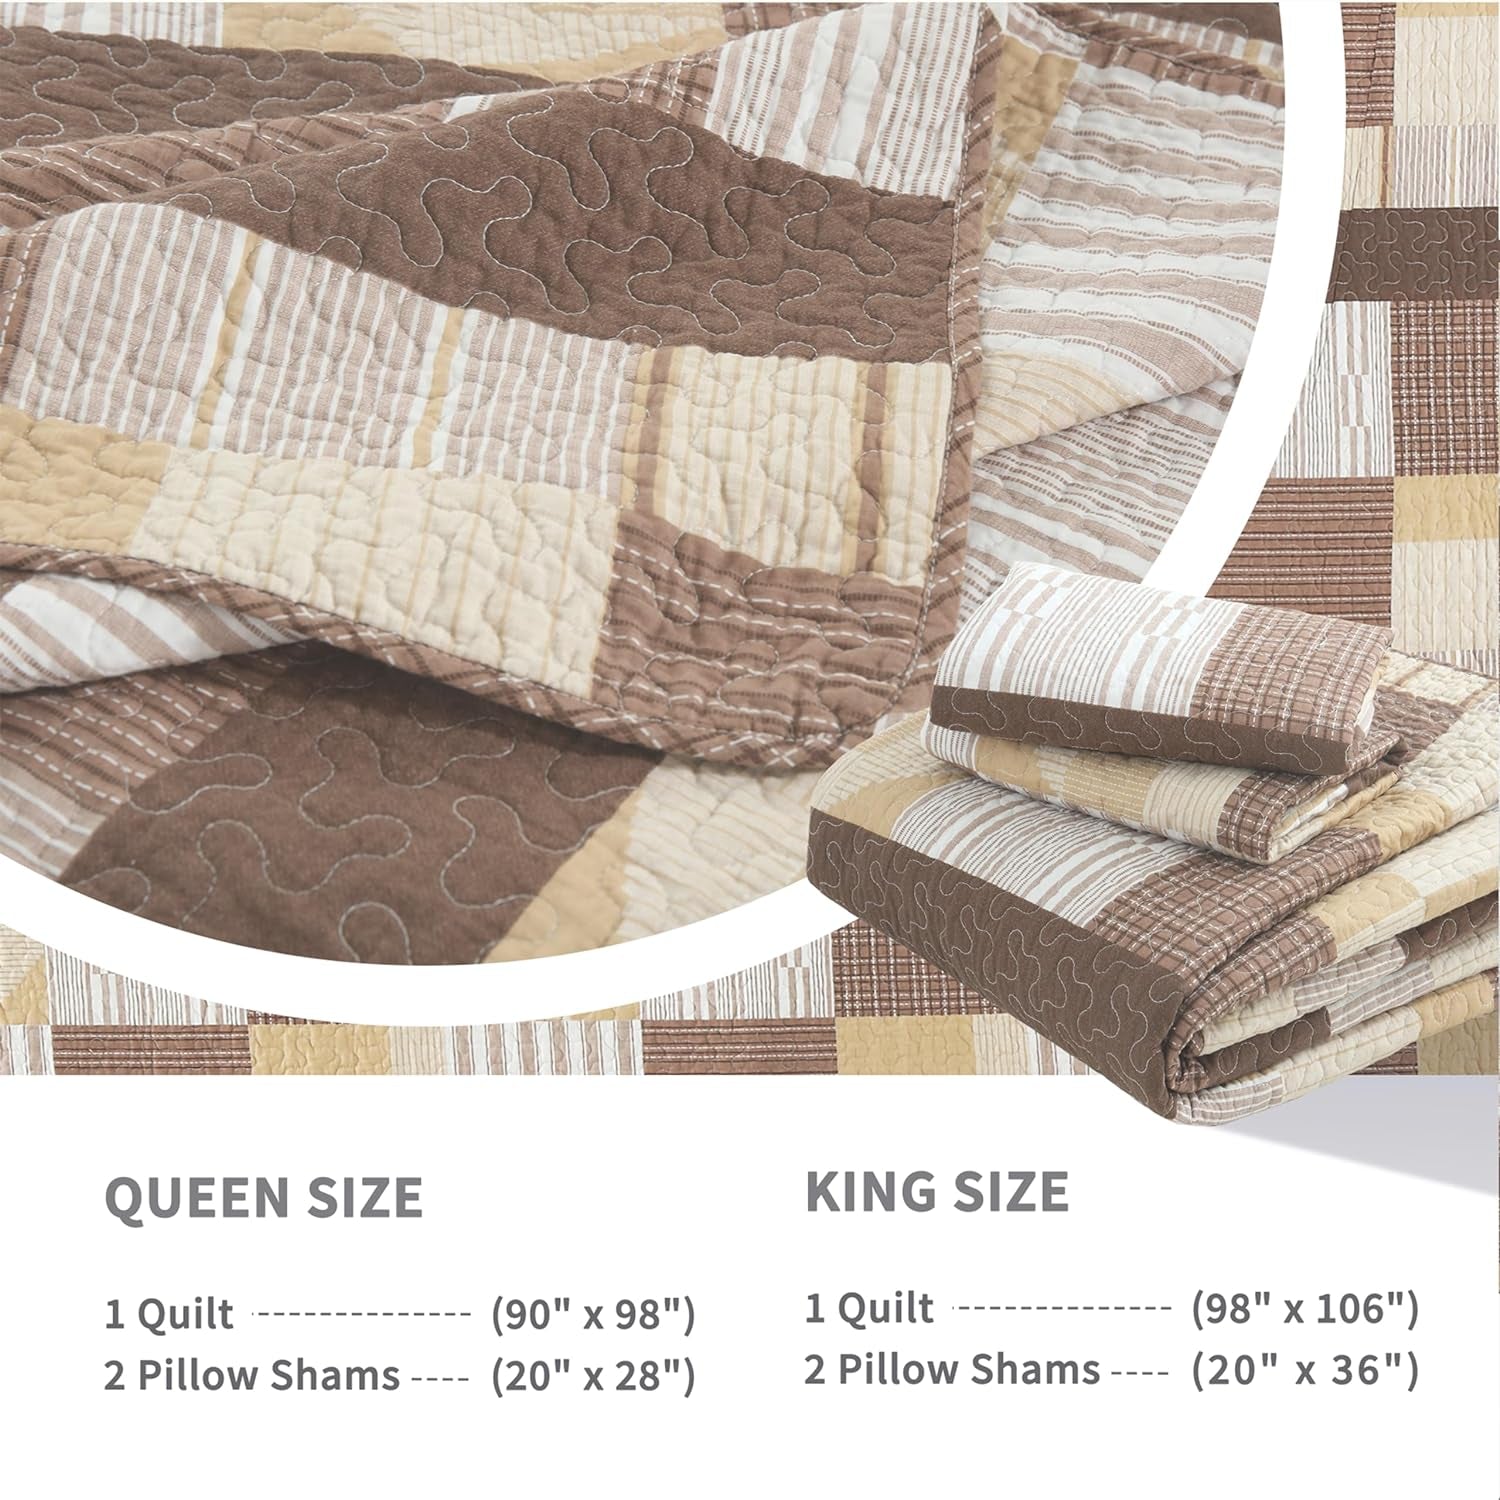 Quilt King Size-100% Cotton Brow Comforter Set King Size,Brown Plaid King Quilt Bedding King,Reversible Lightweight King Comforter Set,Tan White Lightweight Bedding 3 Pc